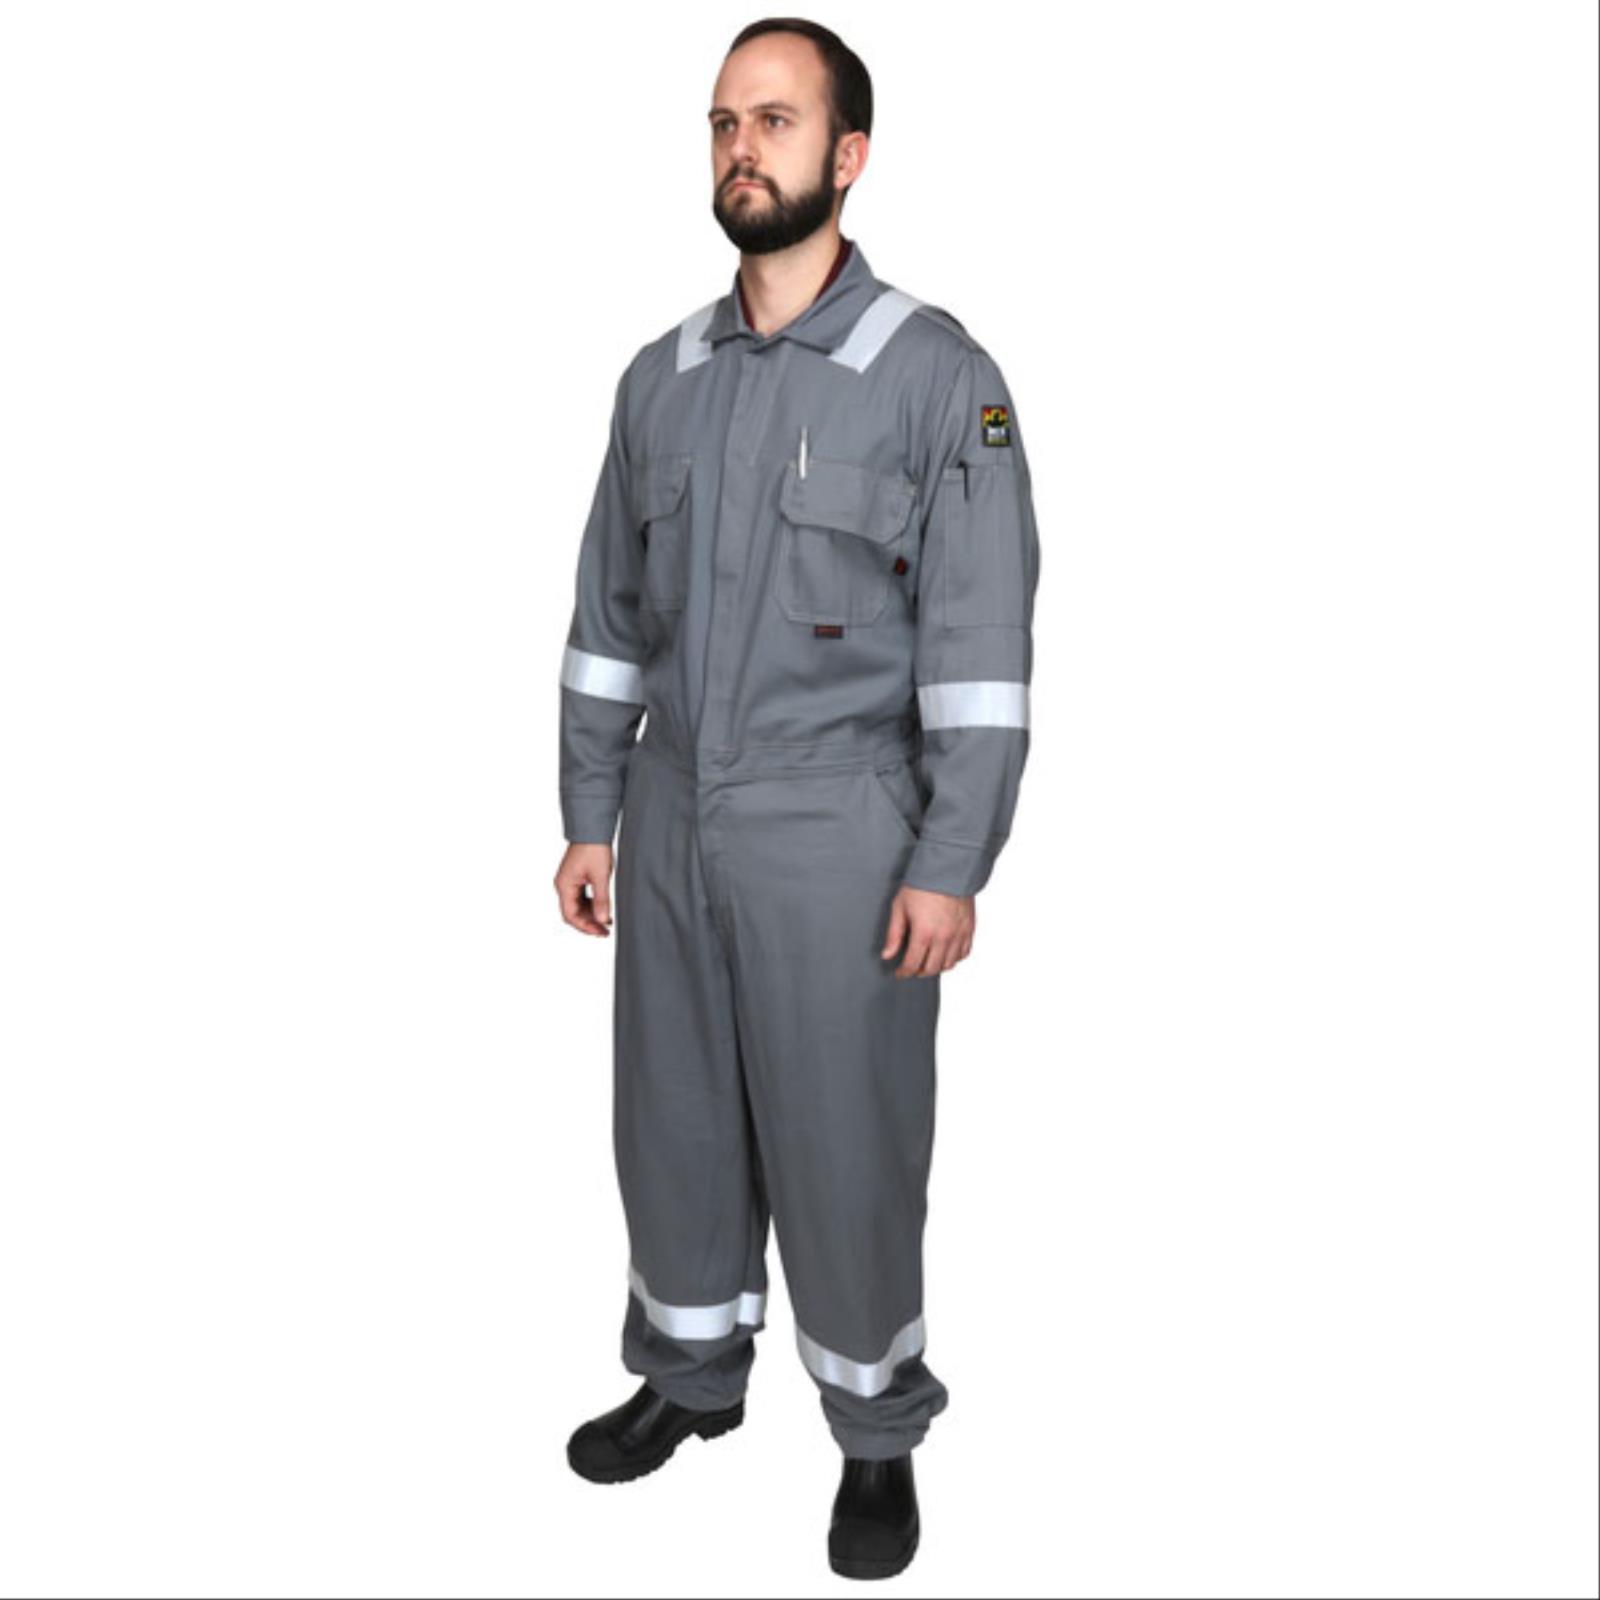 FR Deluxe Coverall, Gray, Reflective